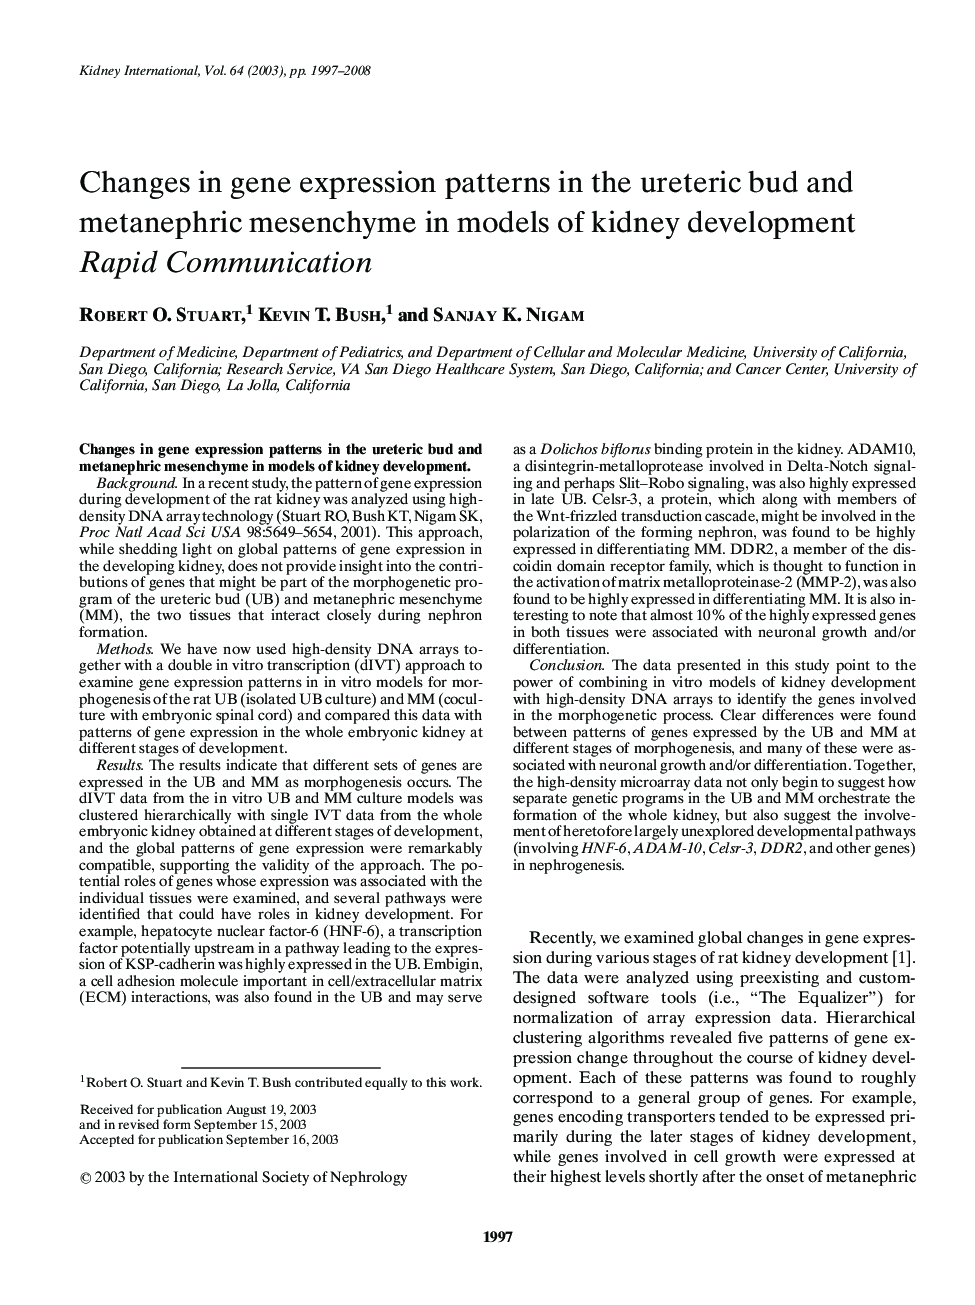 Changes in gene expression patterns in the ureteric bud and metanephric mesenchyme in models of kidney development